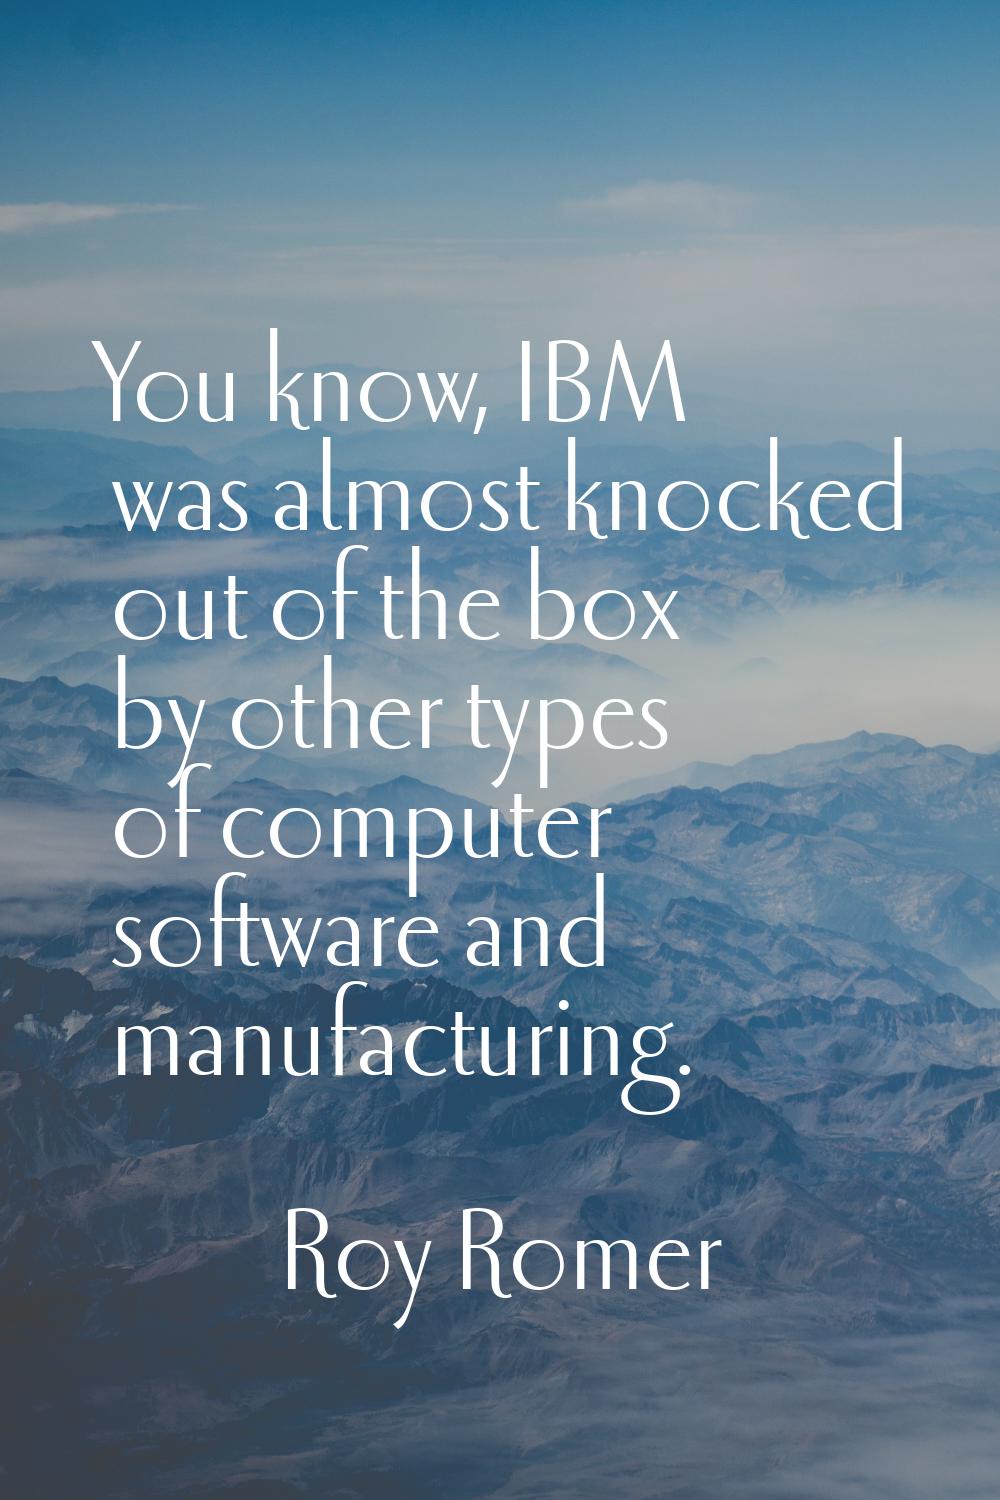 You know, IBM was almost knocked out of the box by other types of computer software and manufacturi